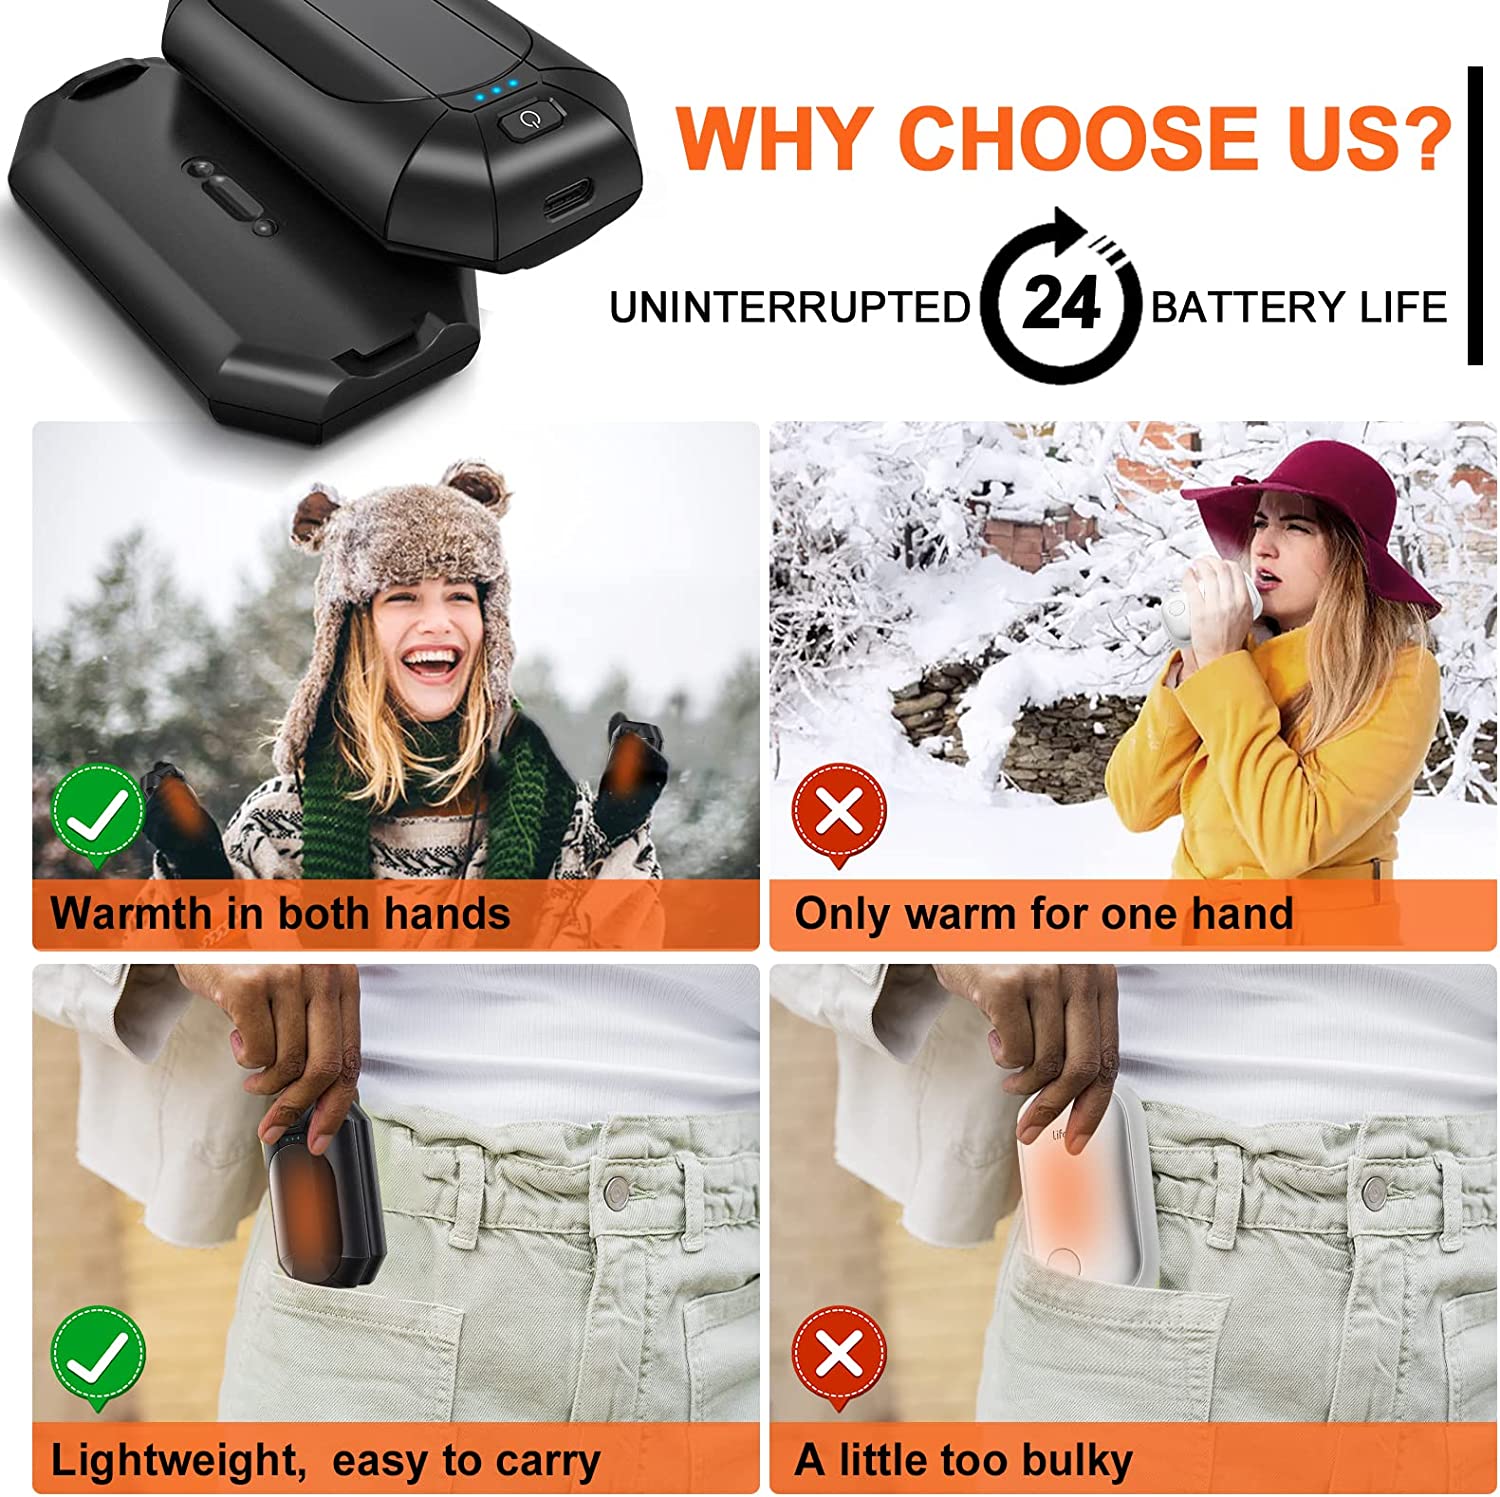 2 Pack Hand Warmers Rechargeable, Electric Hand Warmer Reusable,USB Handwarmers,Outdoor/Indoor/Golf/Camping/Hunting/Pain Relief/Watch Football/Baseball/Warm Gifts for Men Women Kid Birthday Christmas - Delicate Leather